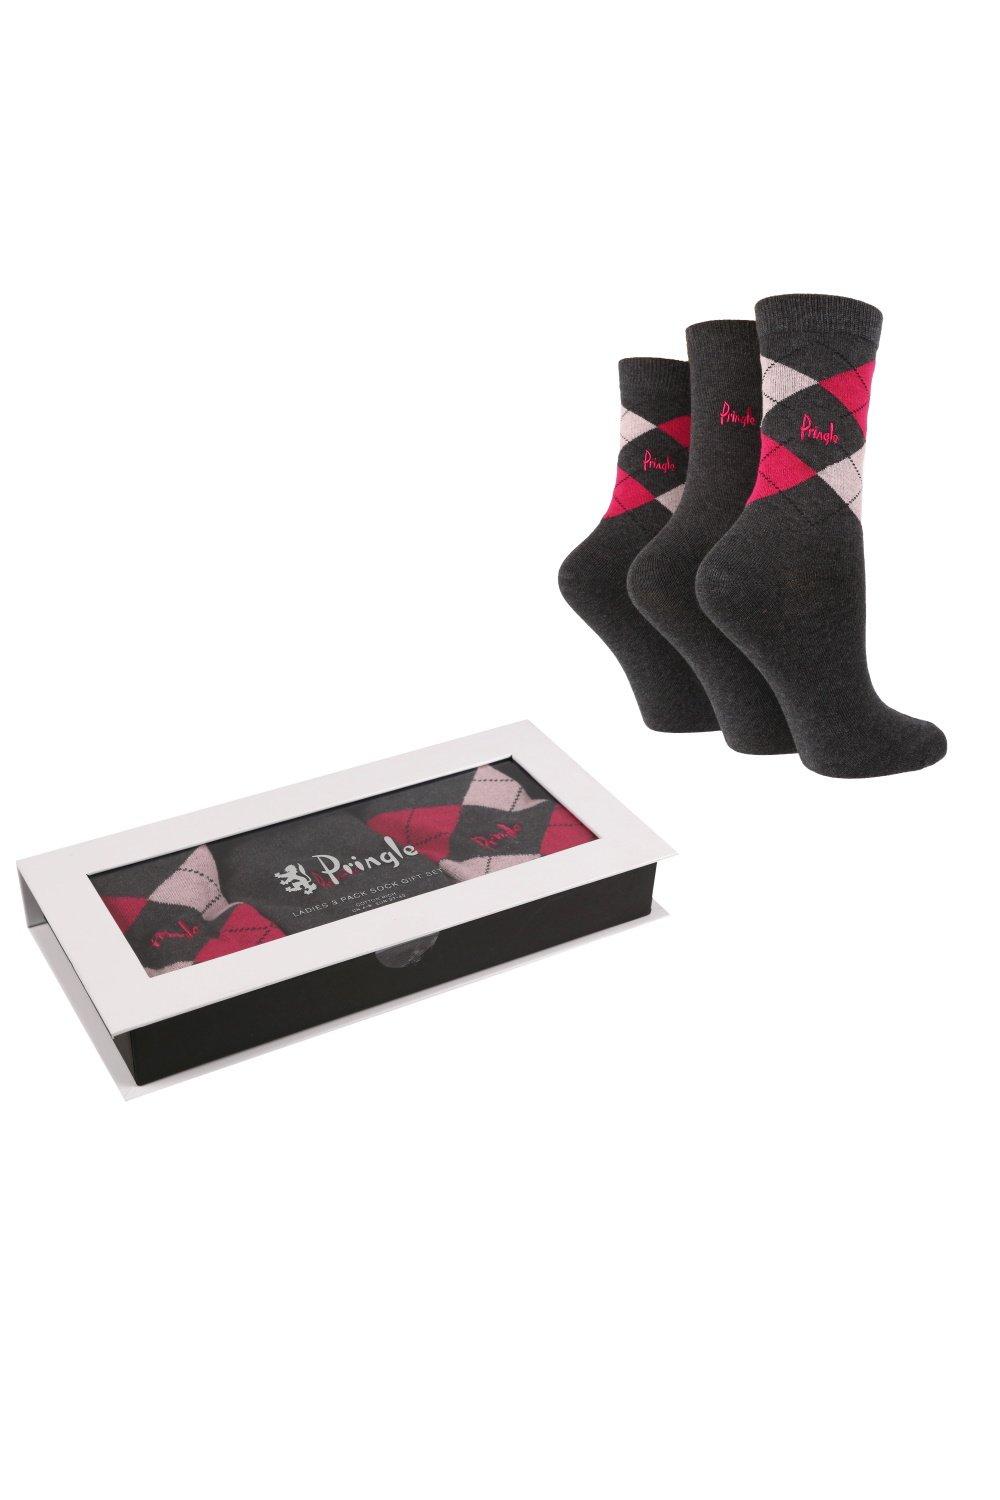 3 Pair Pack Cotton Rich Socks in a Gift Box